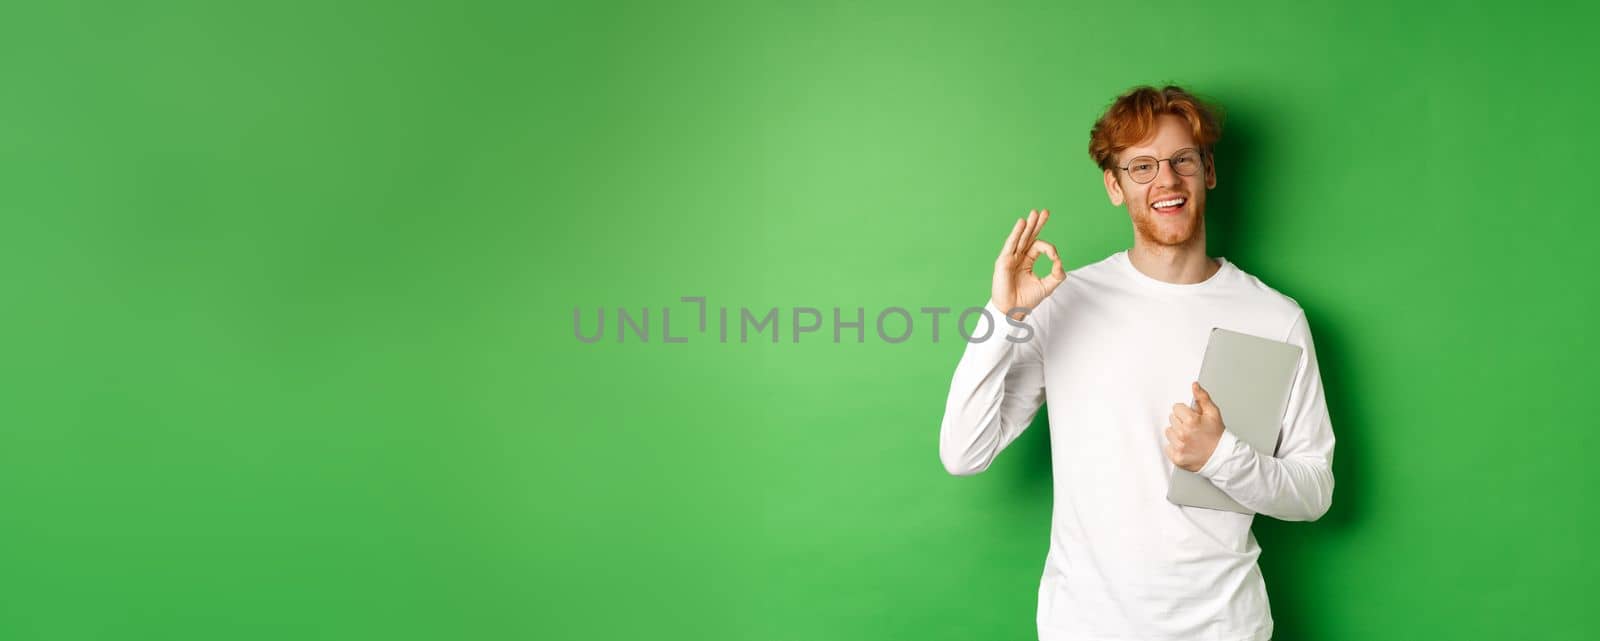 Handsome young male employee in glasses showing Ok sign, holding laptop, standing over green background.